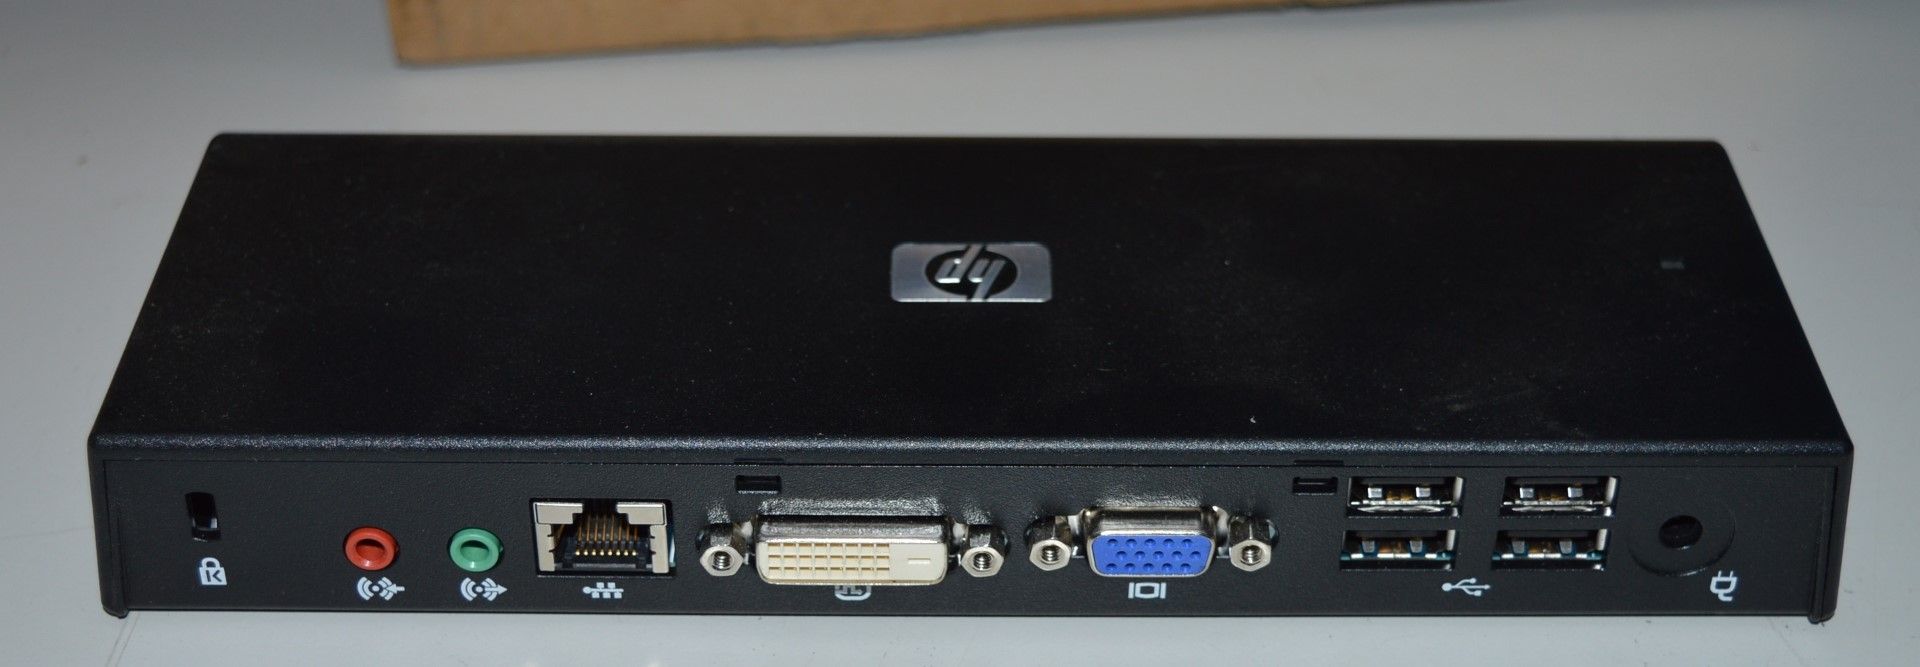 1 x HP USB Docking Station Port Replicator - Model HSTNN-S01X - With Manual and Power Adaptor - - Image 3 of 4